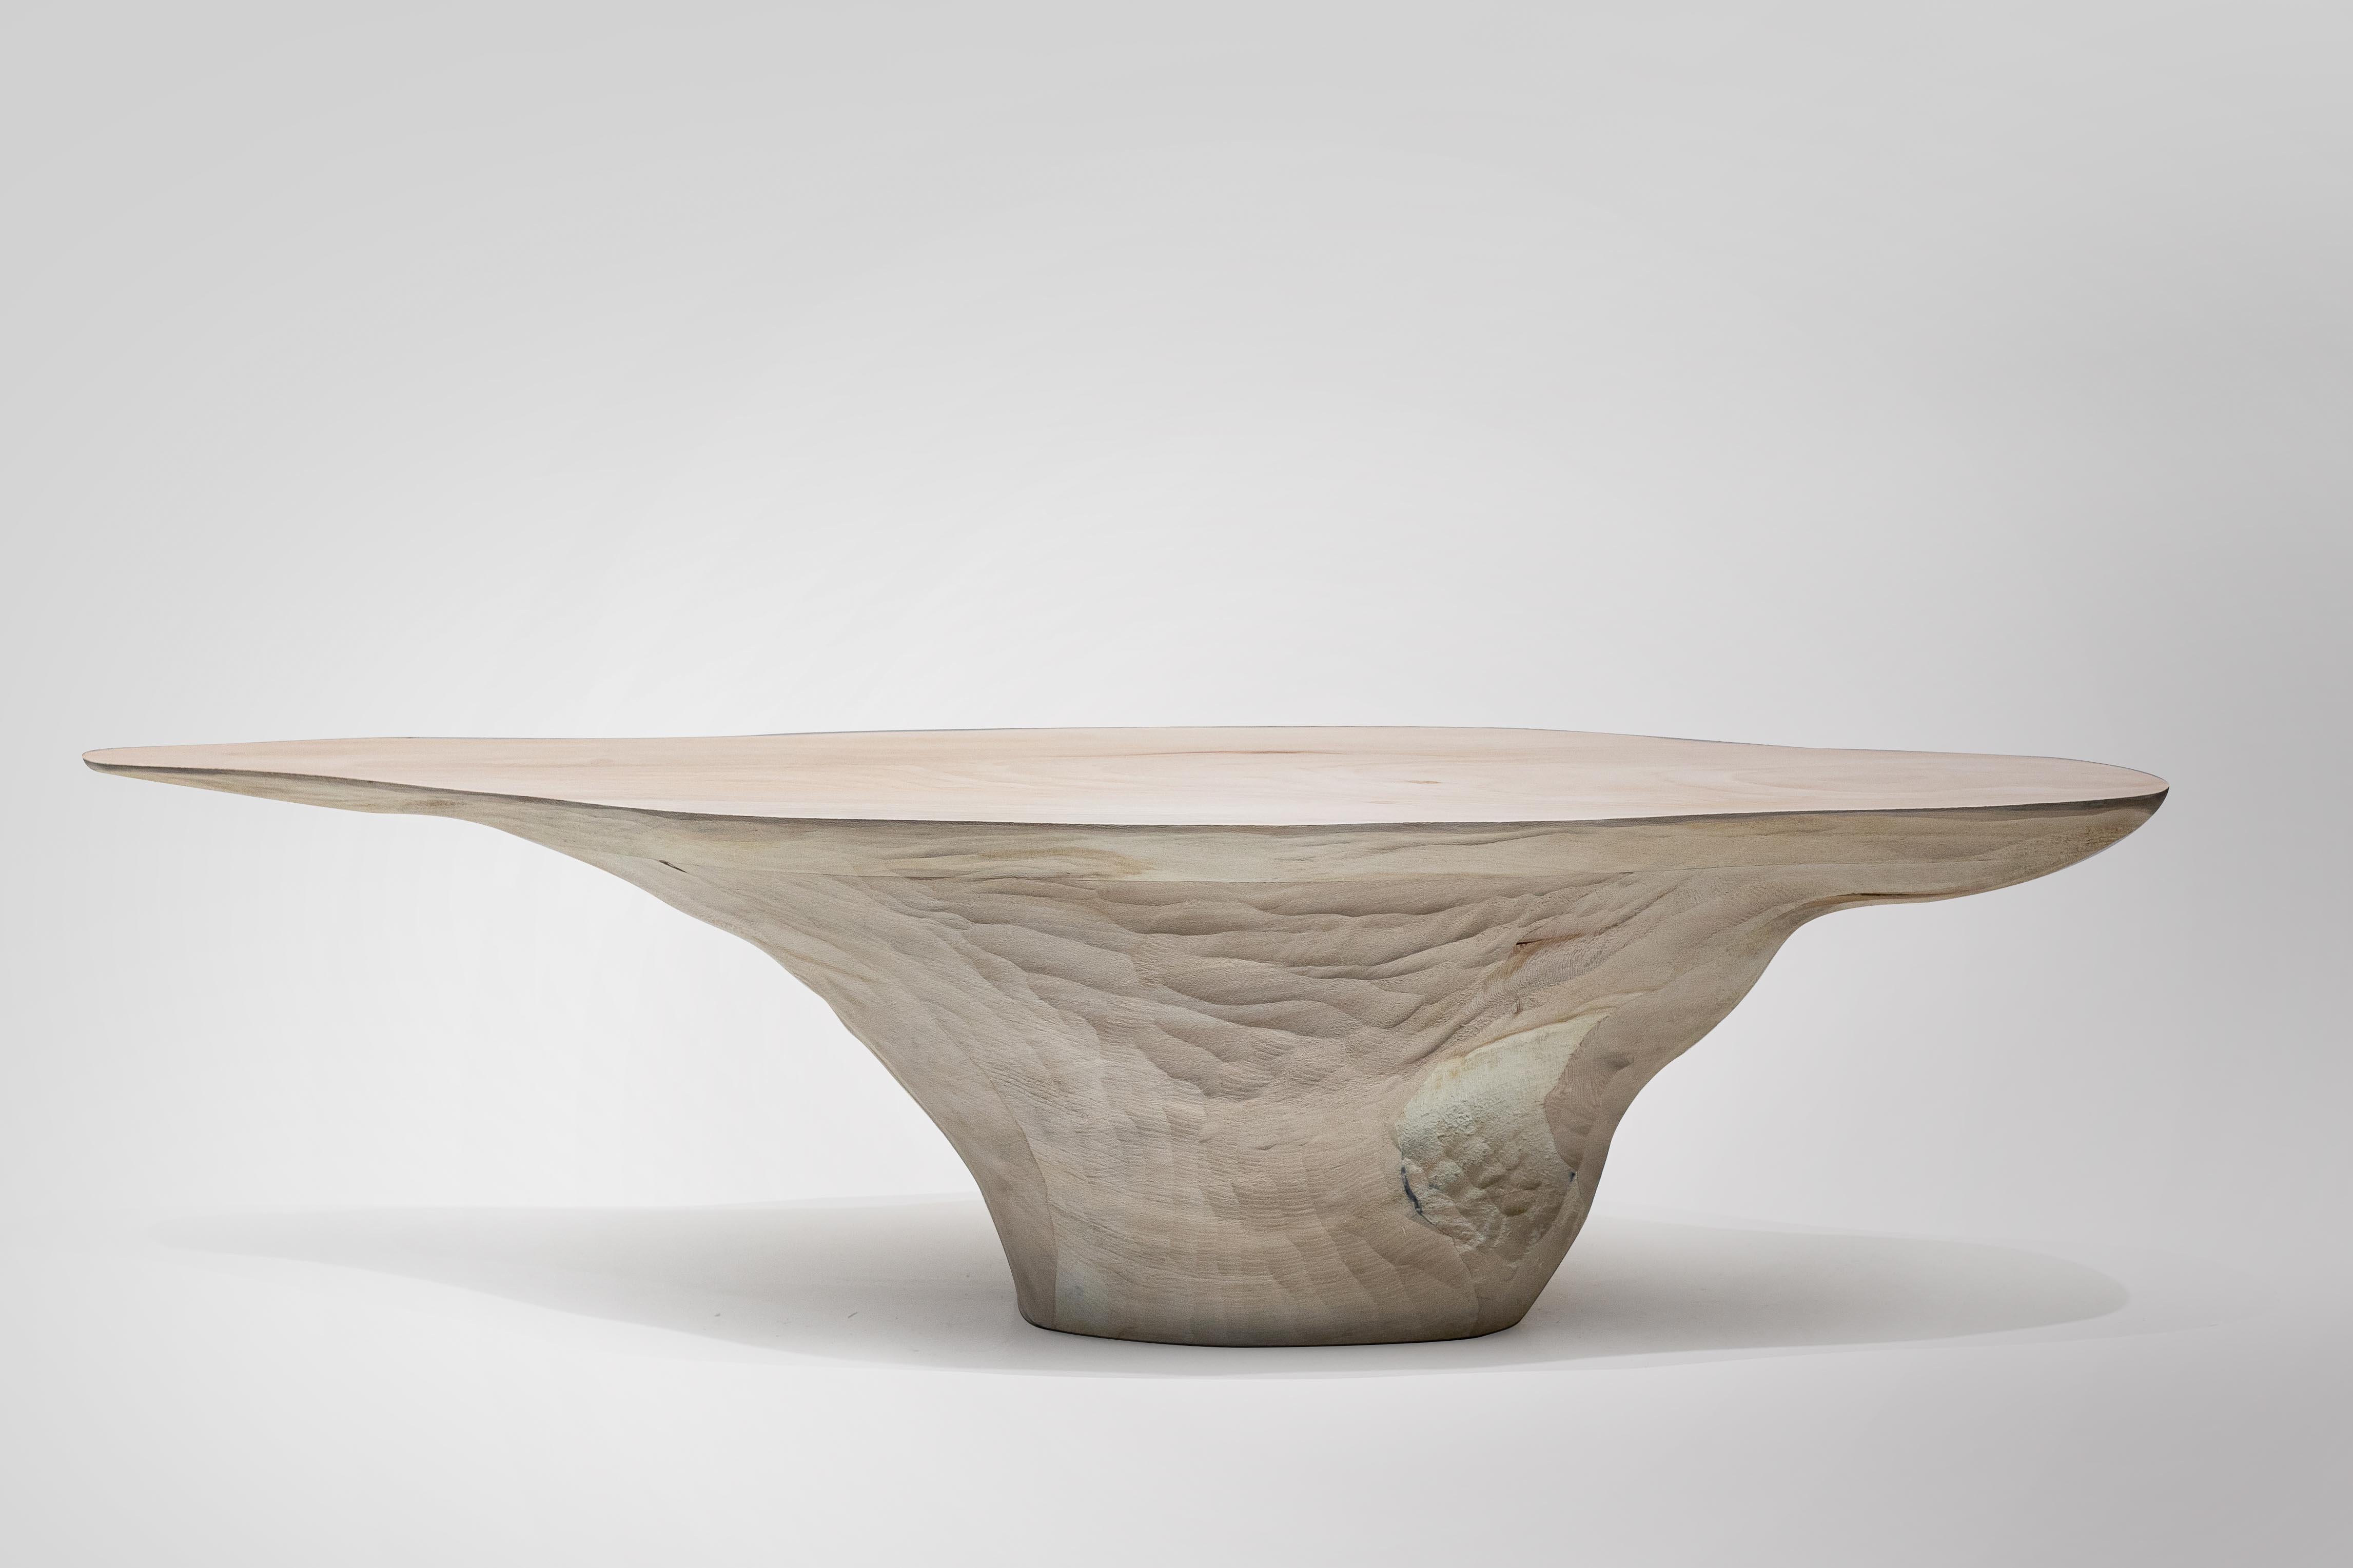 Intuitive Archaisme Massive Coffee Table by Cedric Breisacher
Dimension: D 120 x W 40 x H 35 cm
Materials: Sycamore.
Finish: Bleached, wax-oiled.

Designer-sculptor, Cedric Breisacher has an atypical path. Self-taught man, he followed during five